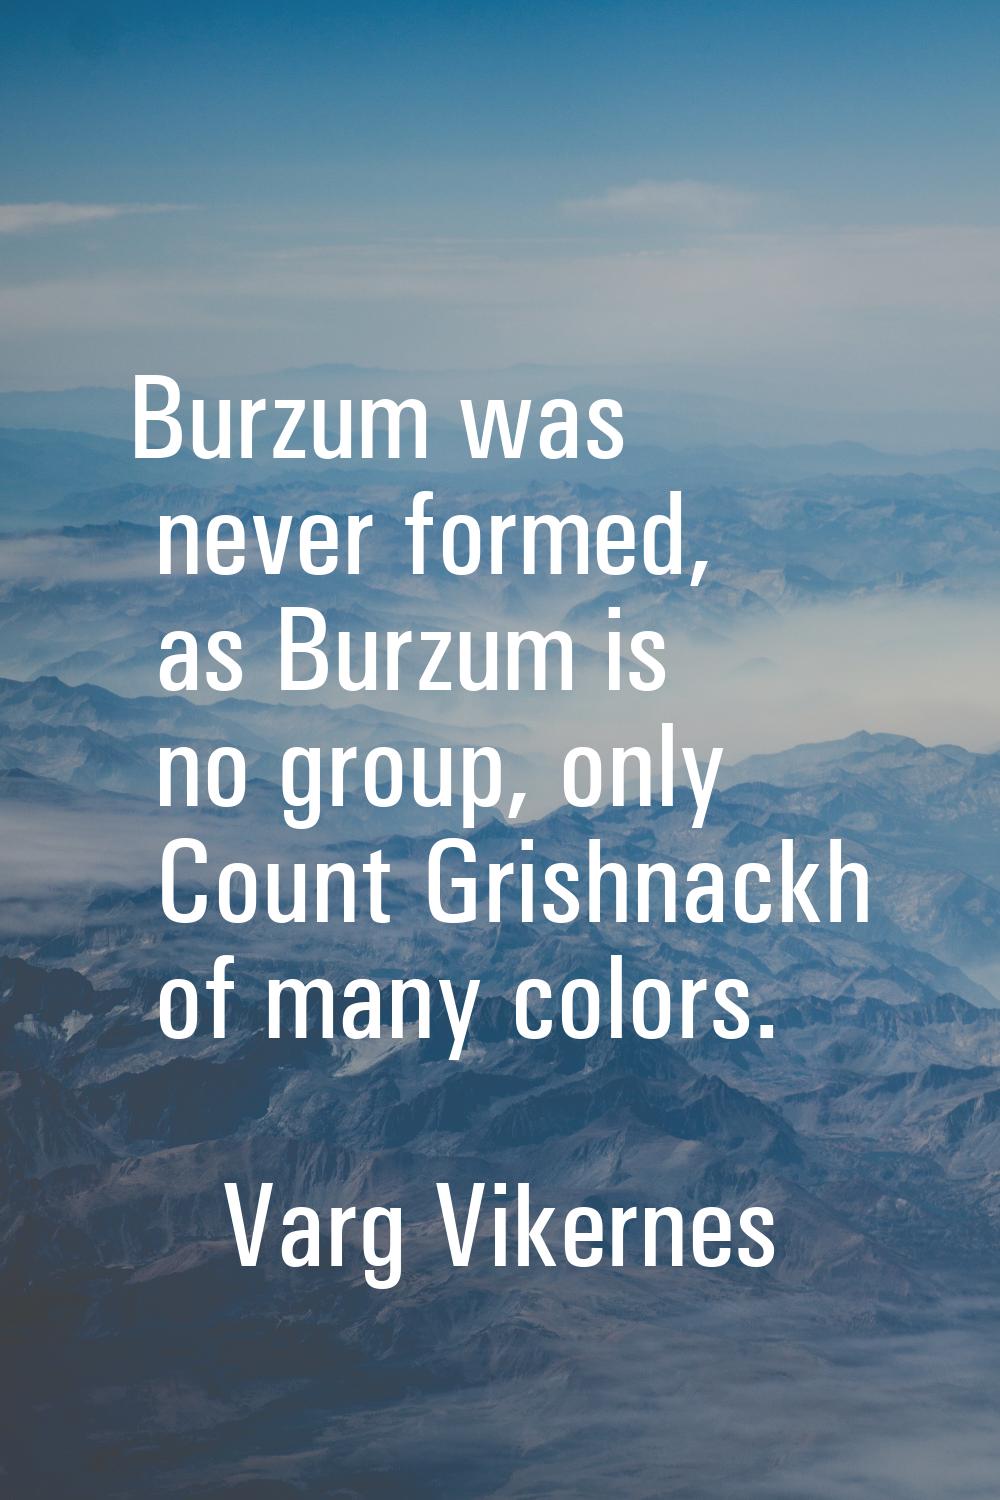 Burzum was never formed, as Burzum is no group, only Count Grishnackh of many colors.